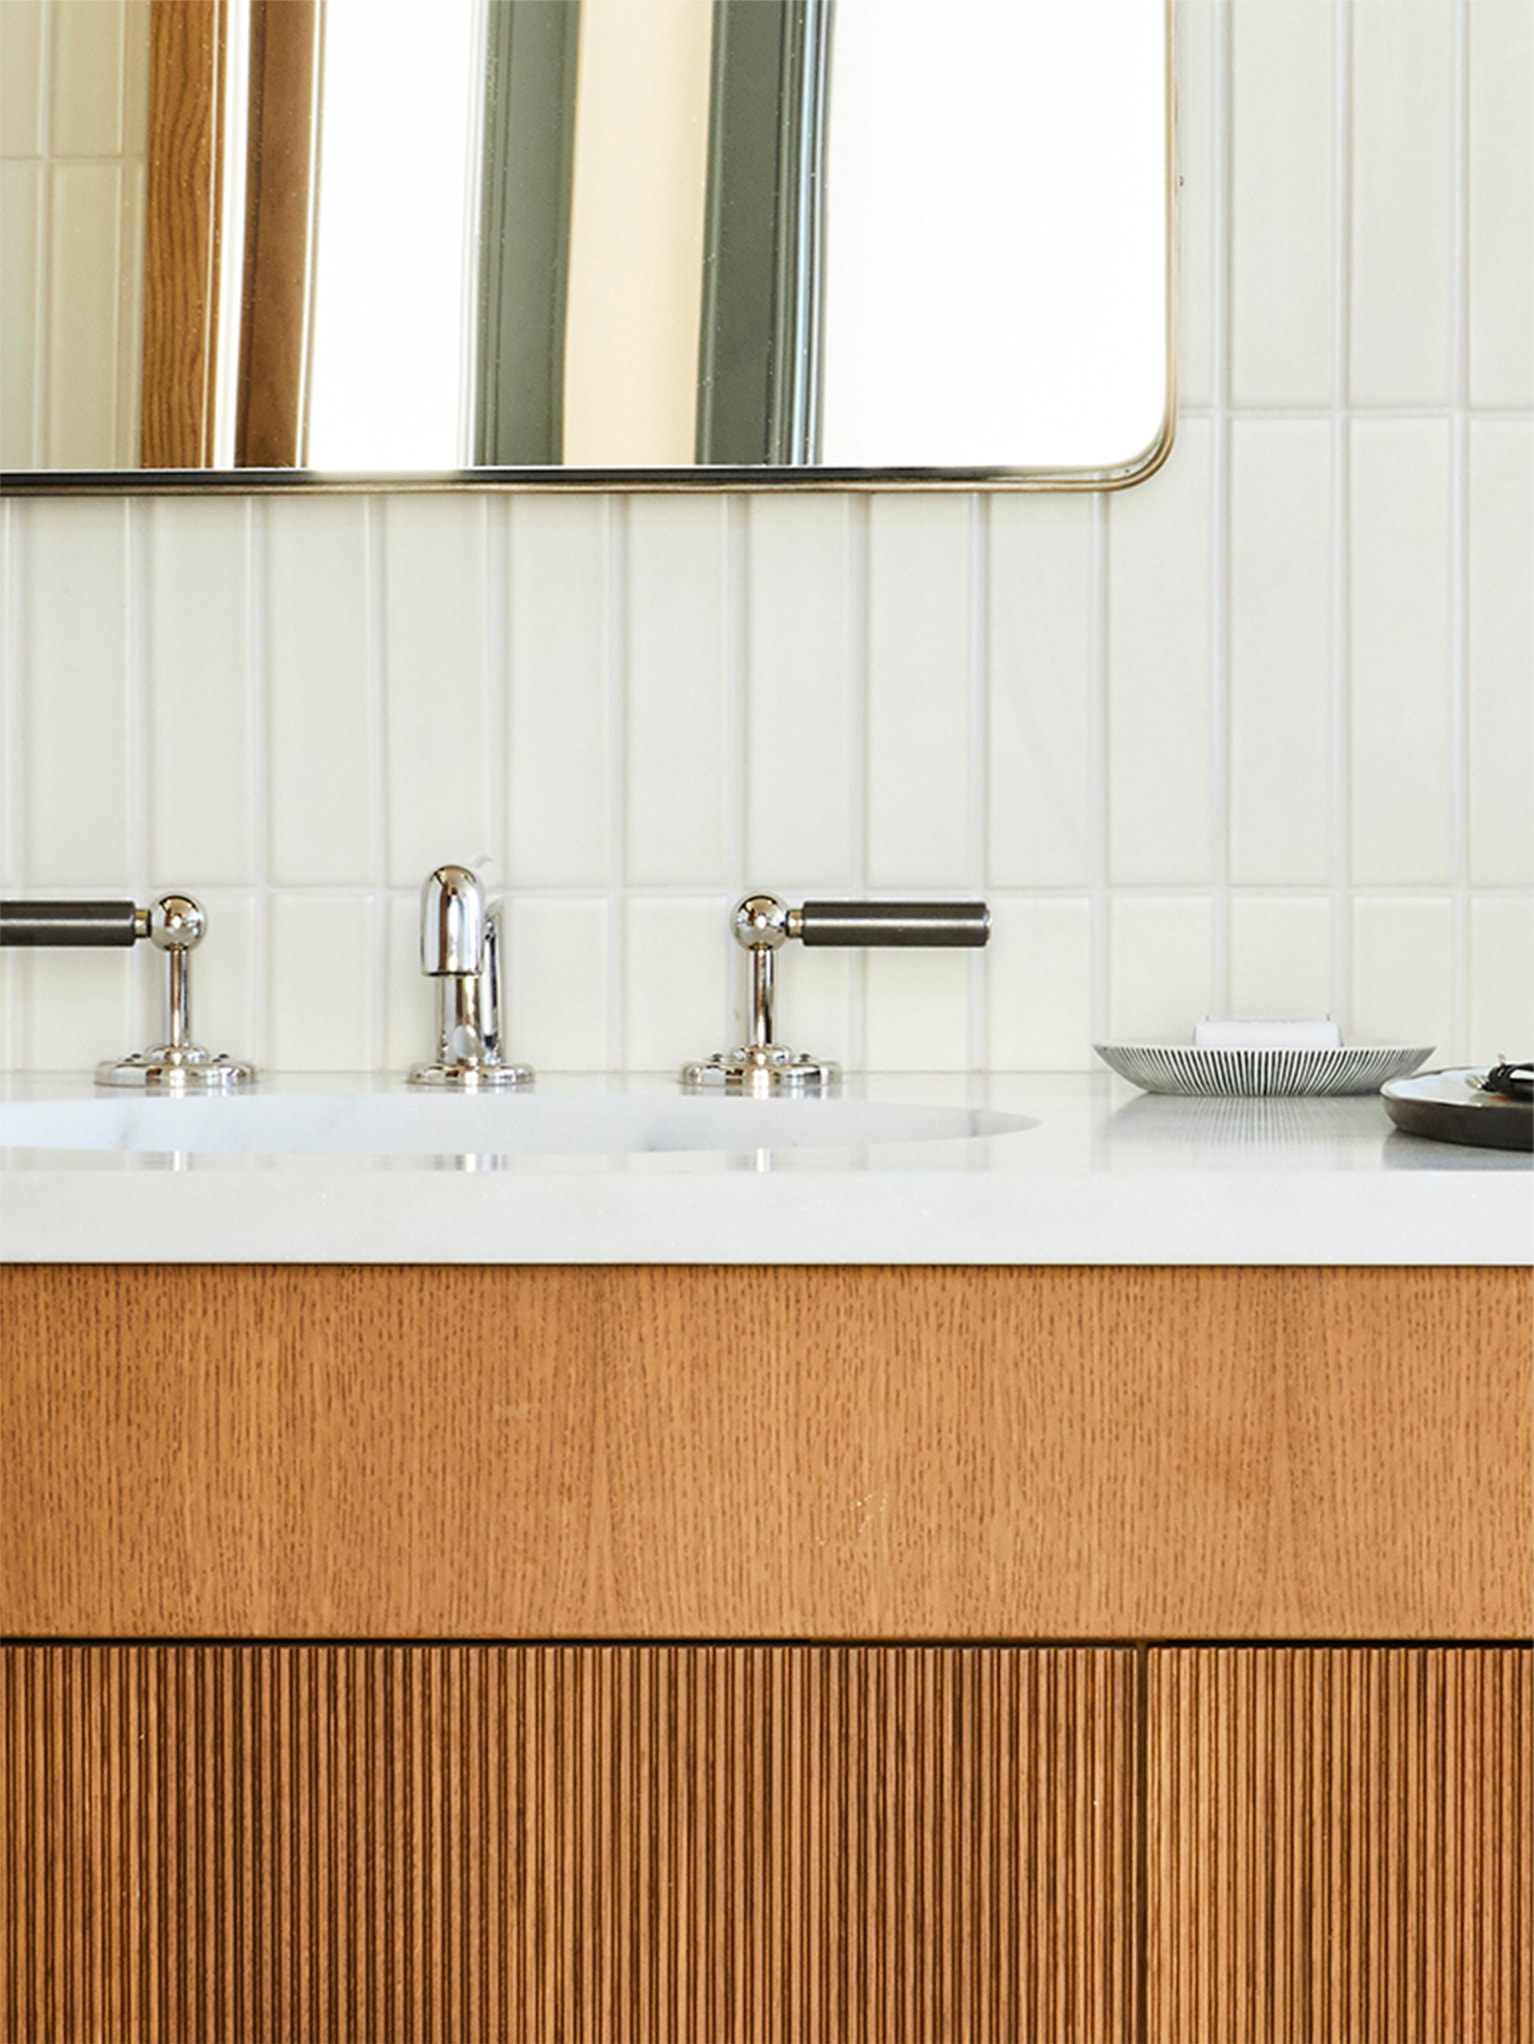 Waterworks and Shinola have partnered on an exclusive new assortment of custom bath fitting